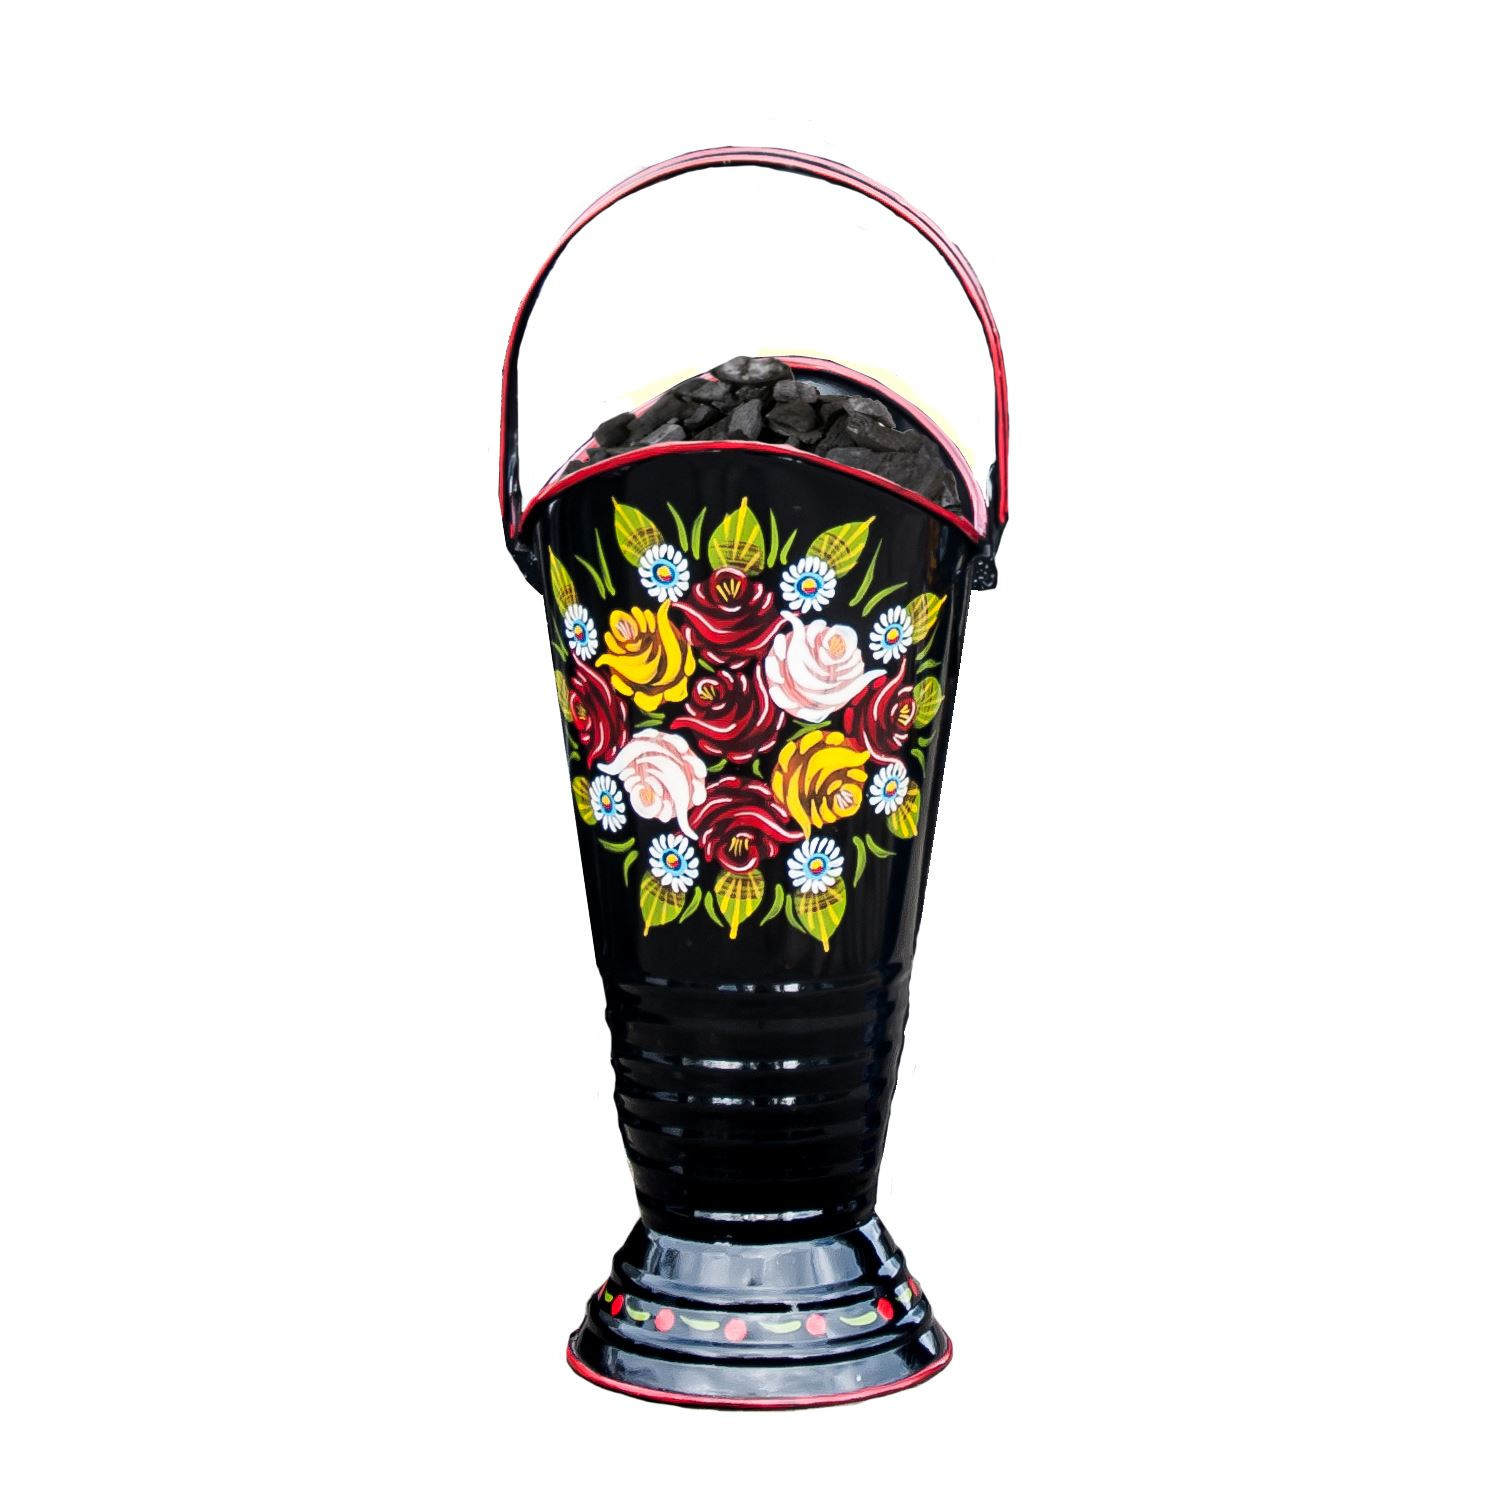 19 Unique Hand Painted Floor Vase 2024 free download hand painted floor vase of hand painted narrowboat coal hod or umbrella stand ebay intended for hand painted narrowboat coal hod or umbrella stand